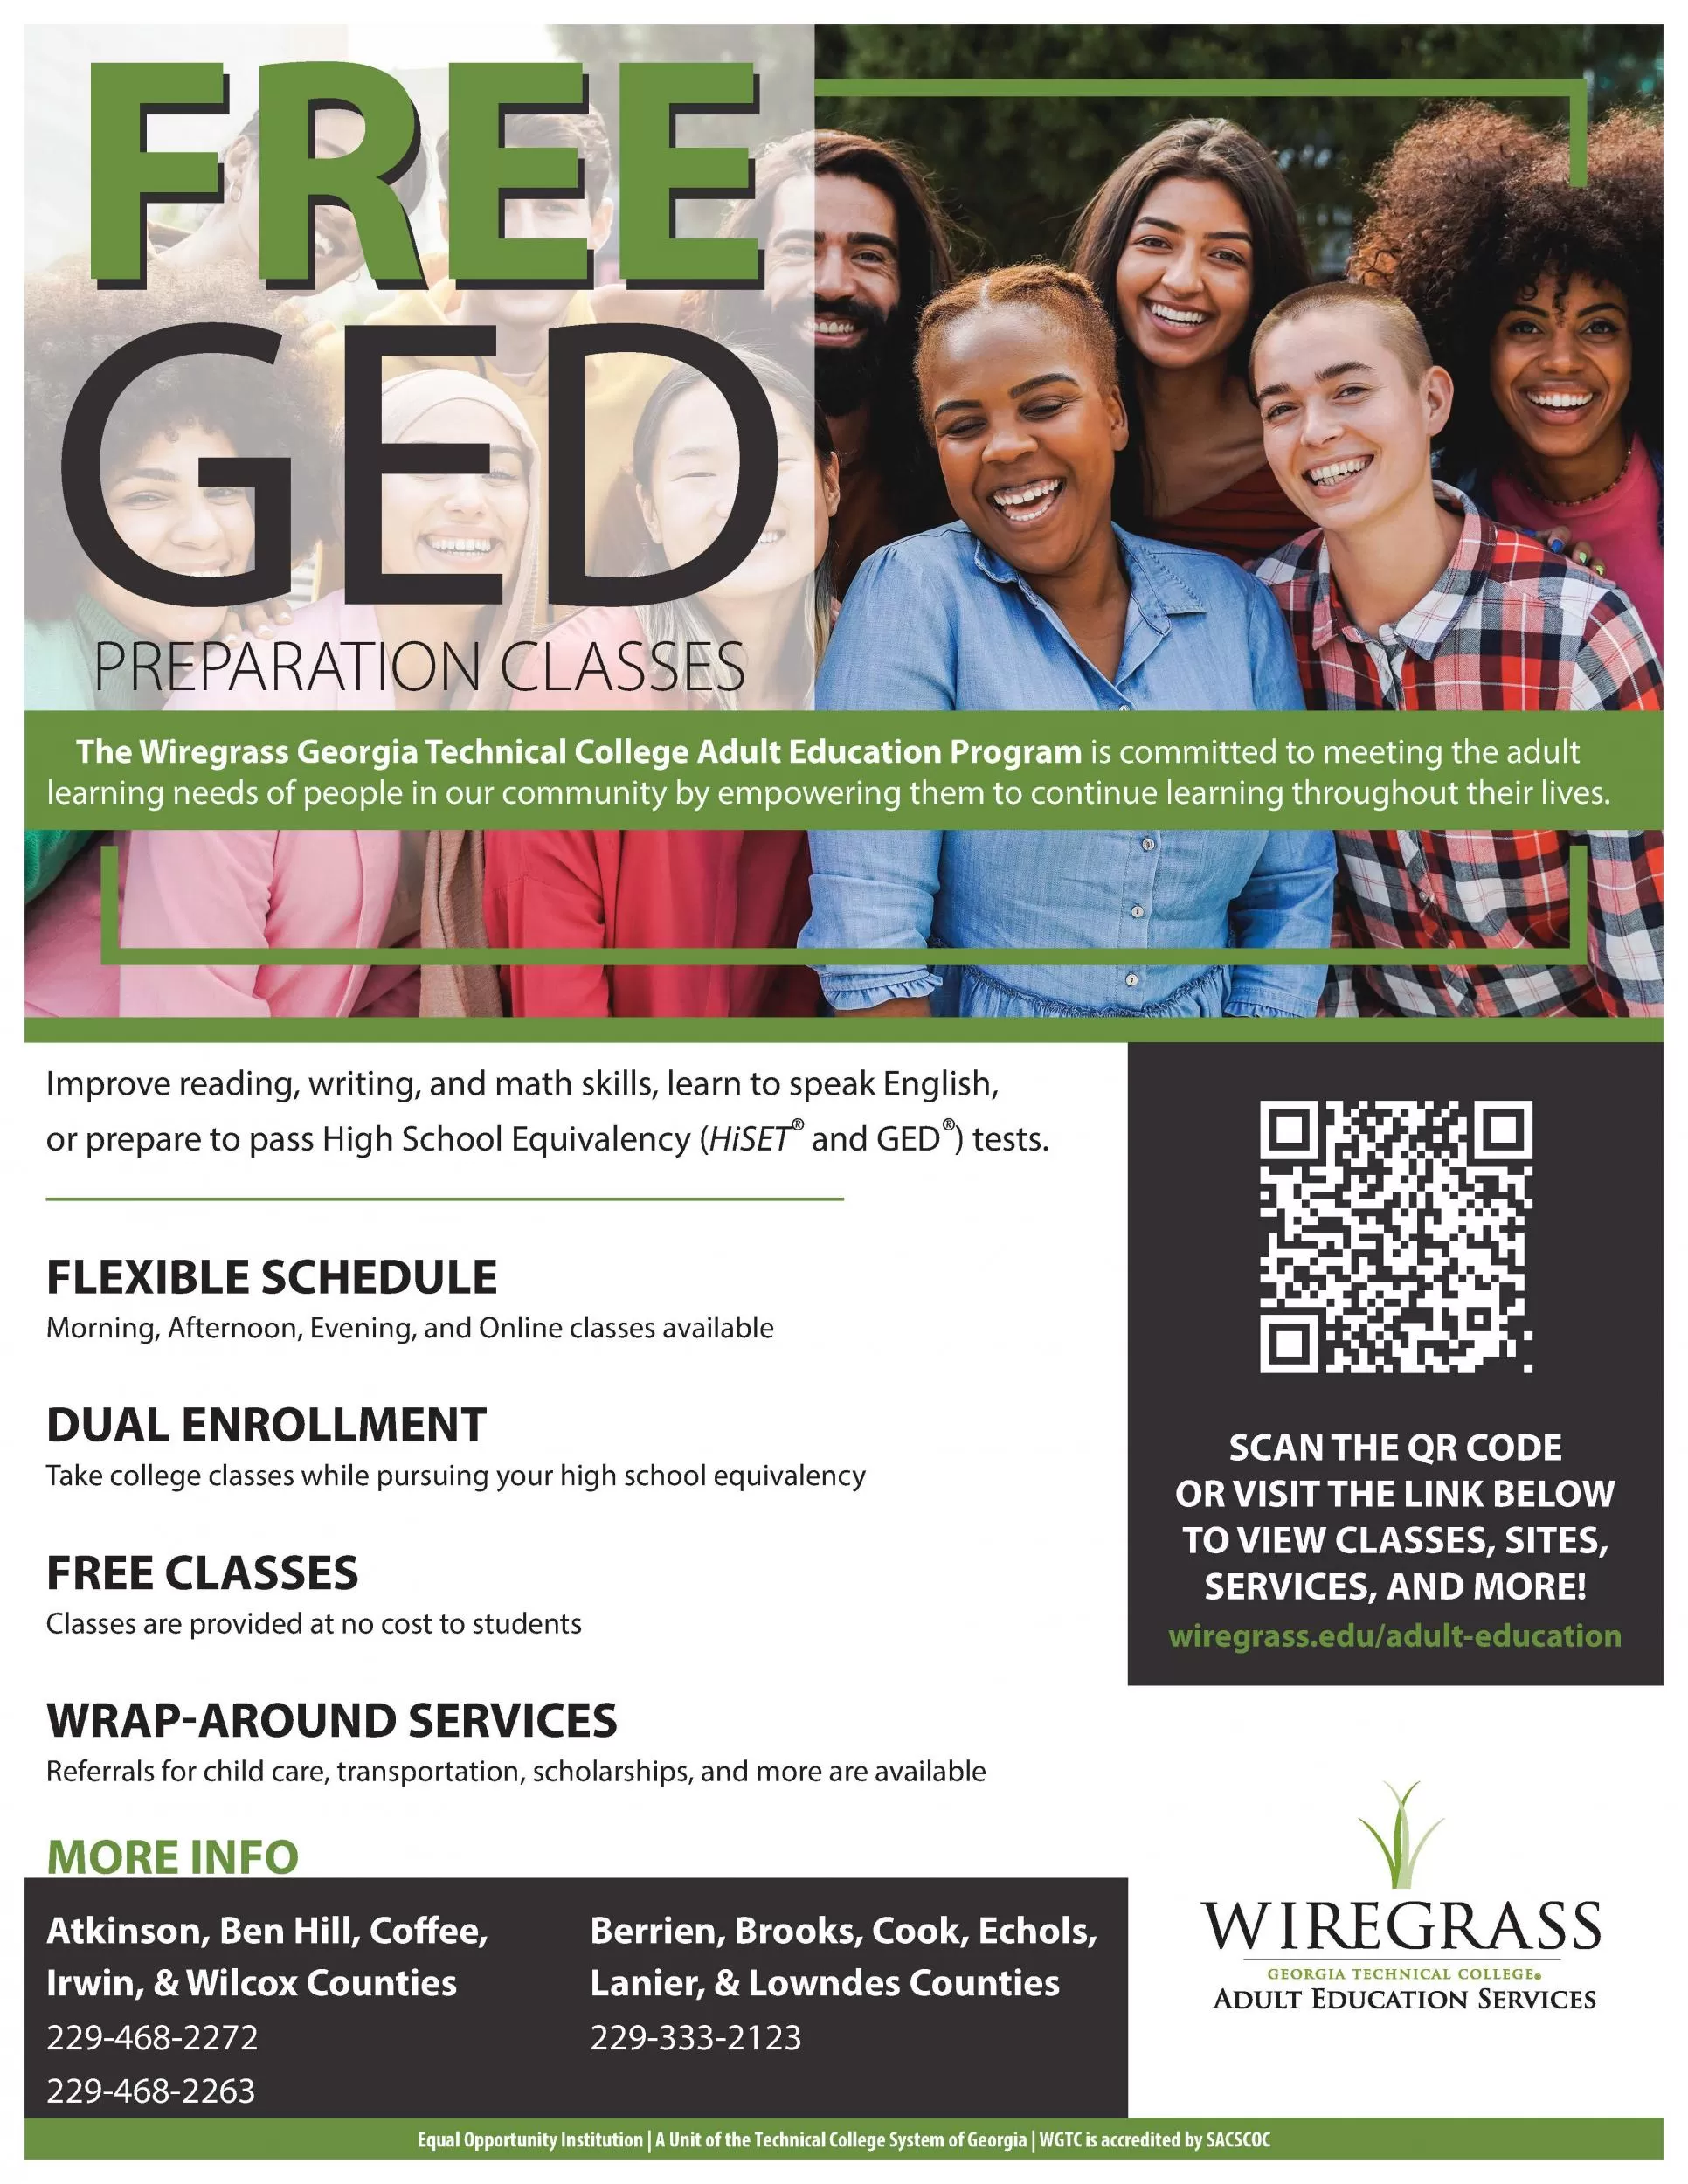 Accepting New GED Students for FREE Online Classes